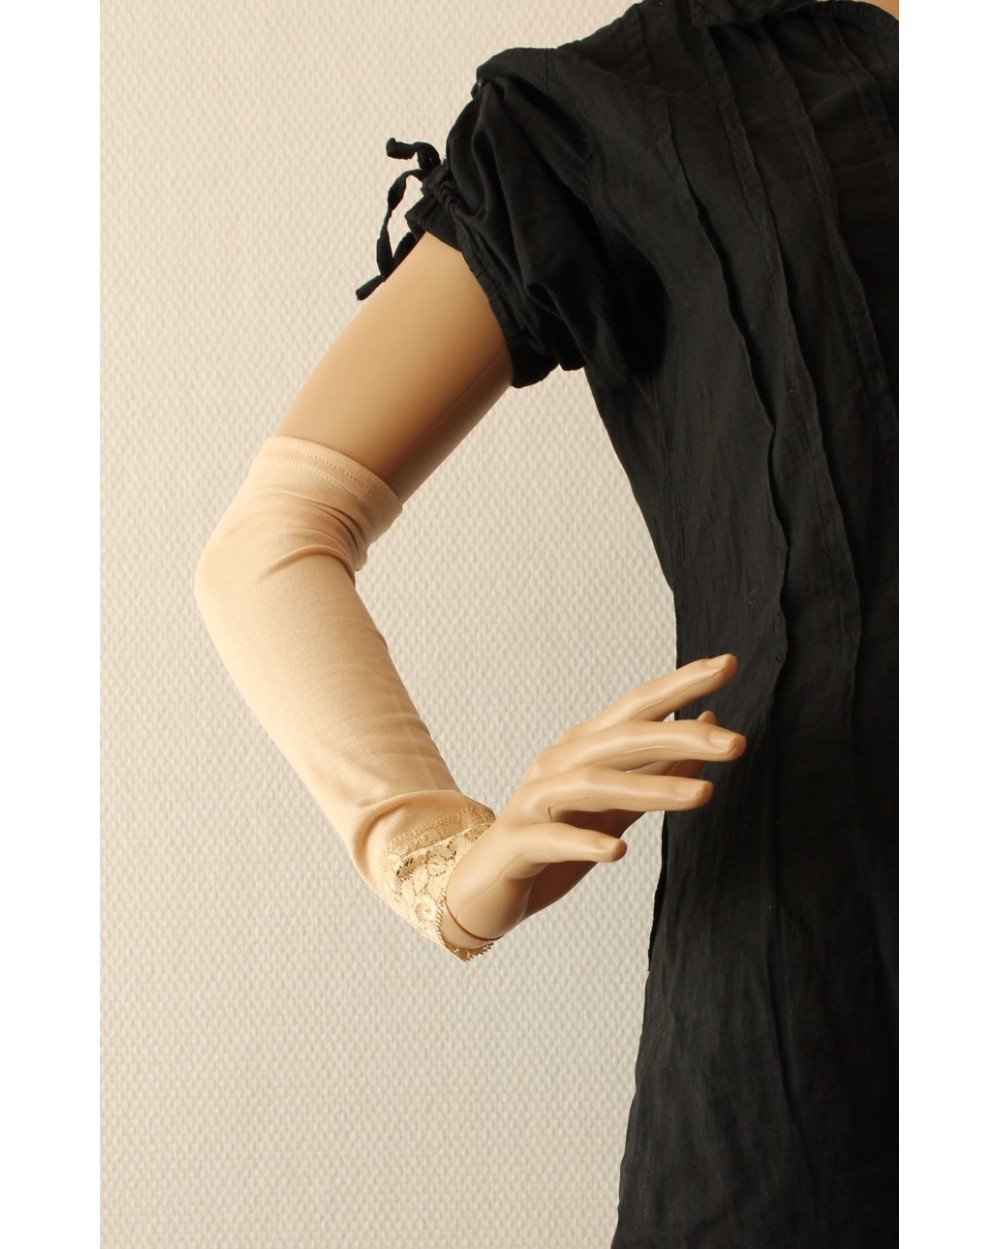 Arm Sleeves Cover with Lace